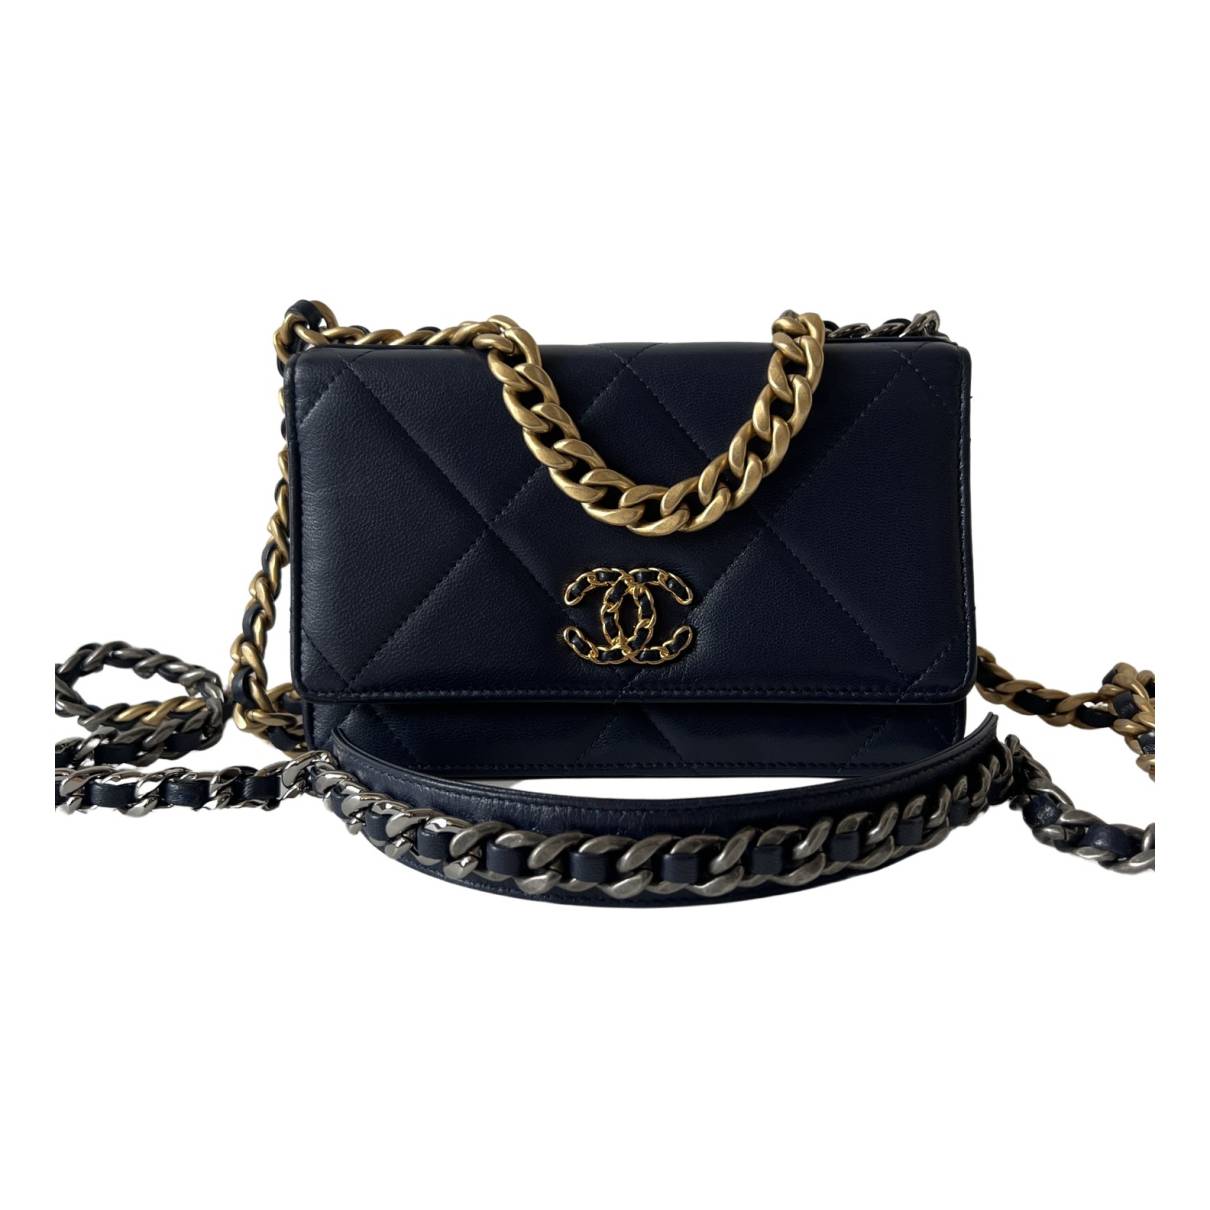 Wallet on chain chanel 19 leather handbag Chanel Navy in Leather - 31769998